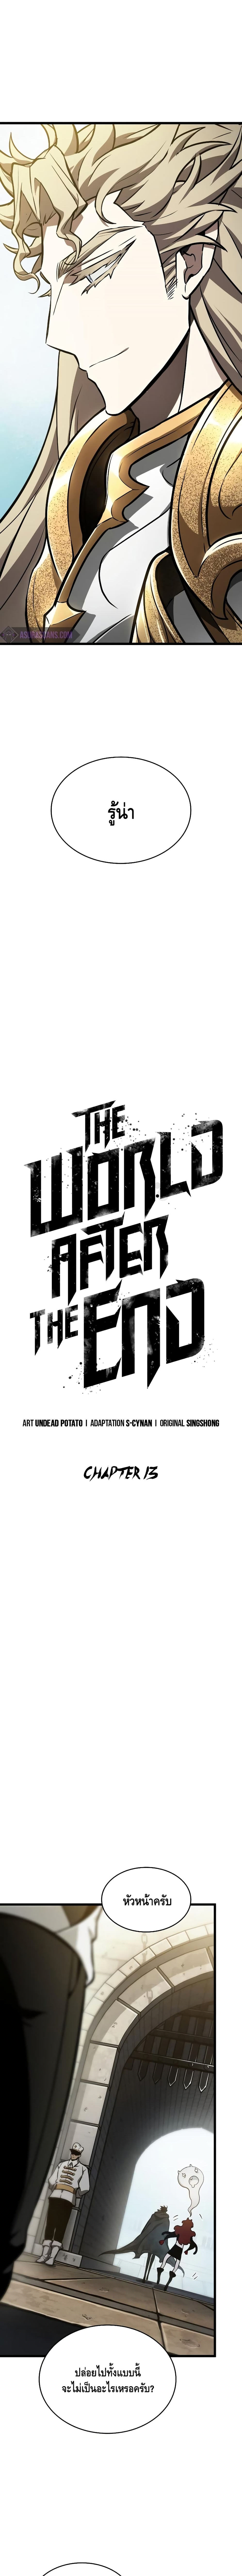 The World After The End 13-13